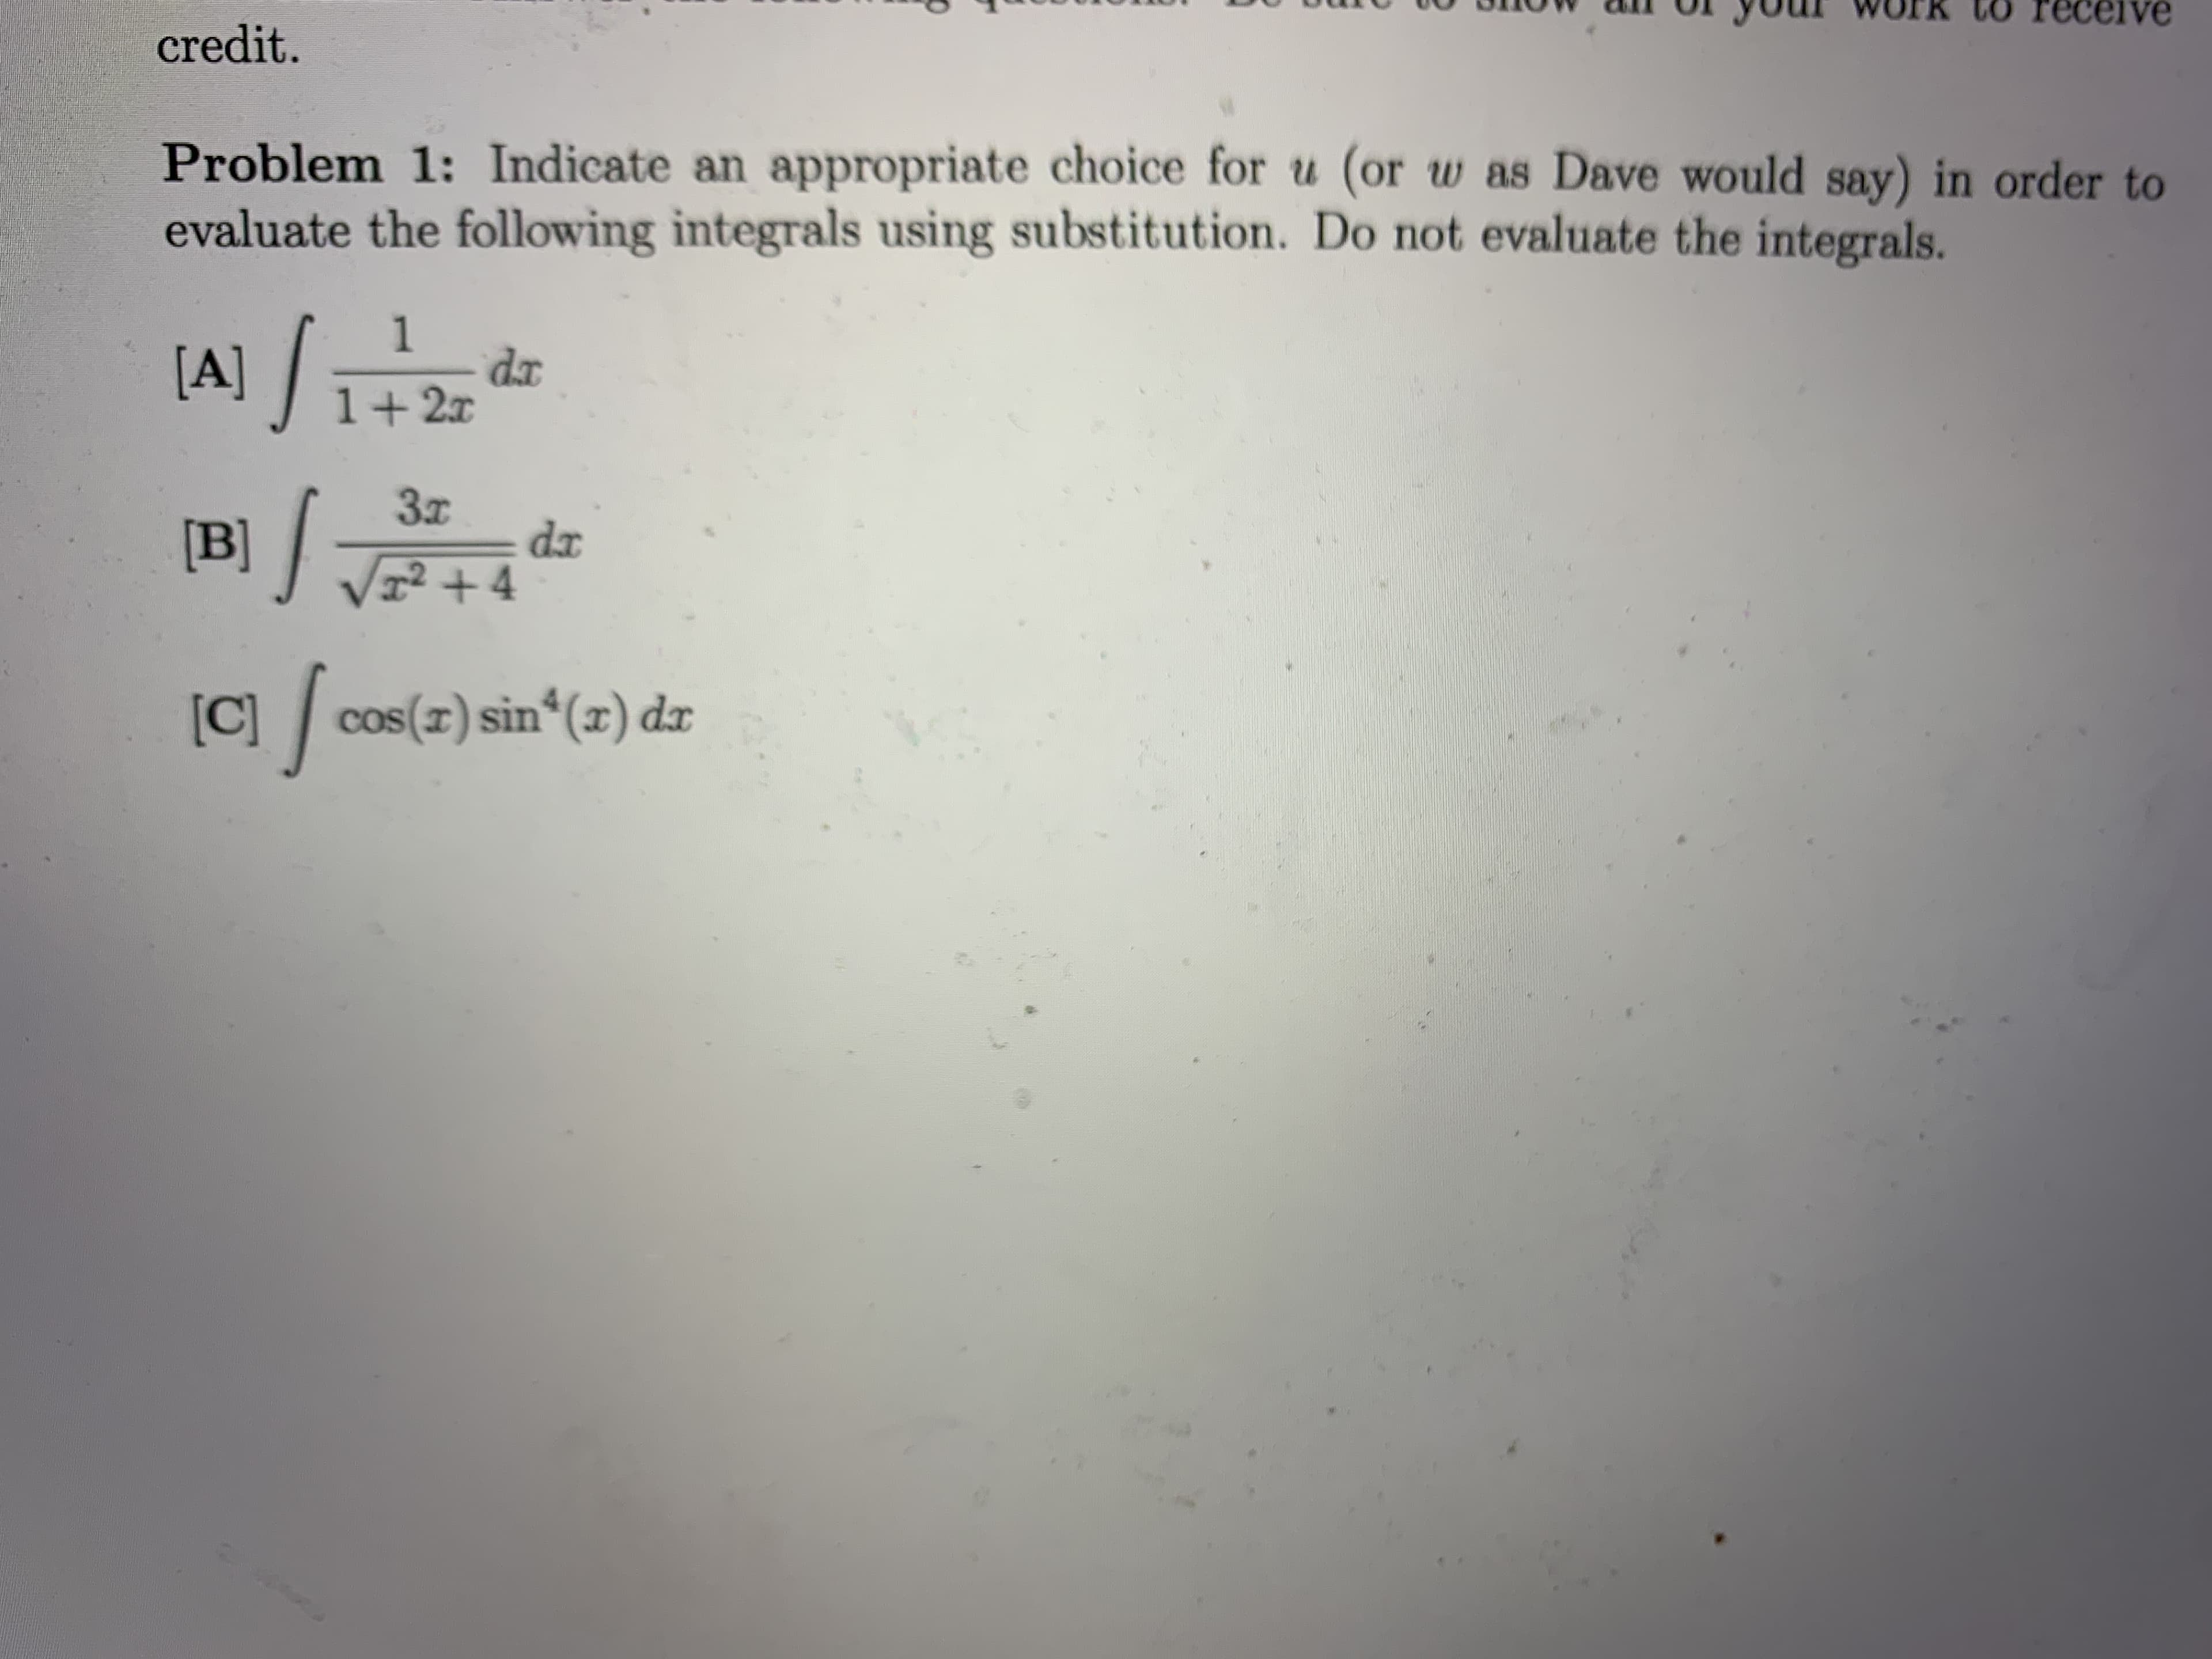 Problem 1: Indicate an appropriate choice for u (or w as Dave would say) in order to
evaluate the following integrals using substitution. Do not evaluate the integrals.
|A) /
1
dx
1+2x
dx
[B] J +4
[C] /
cos(I) sin*(x) dx
